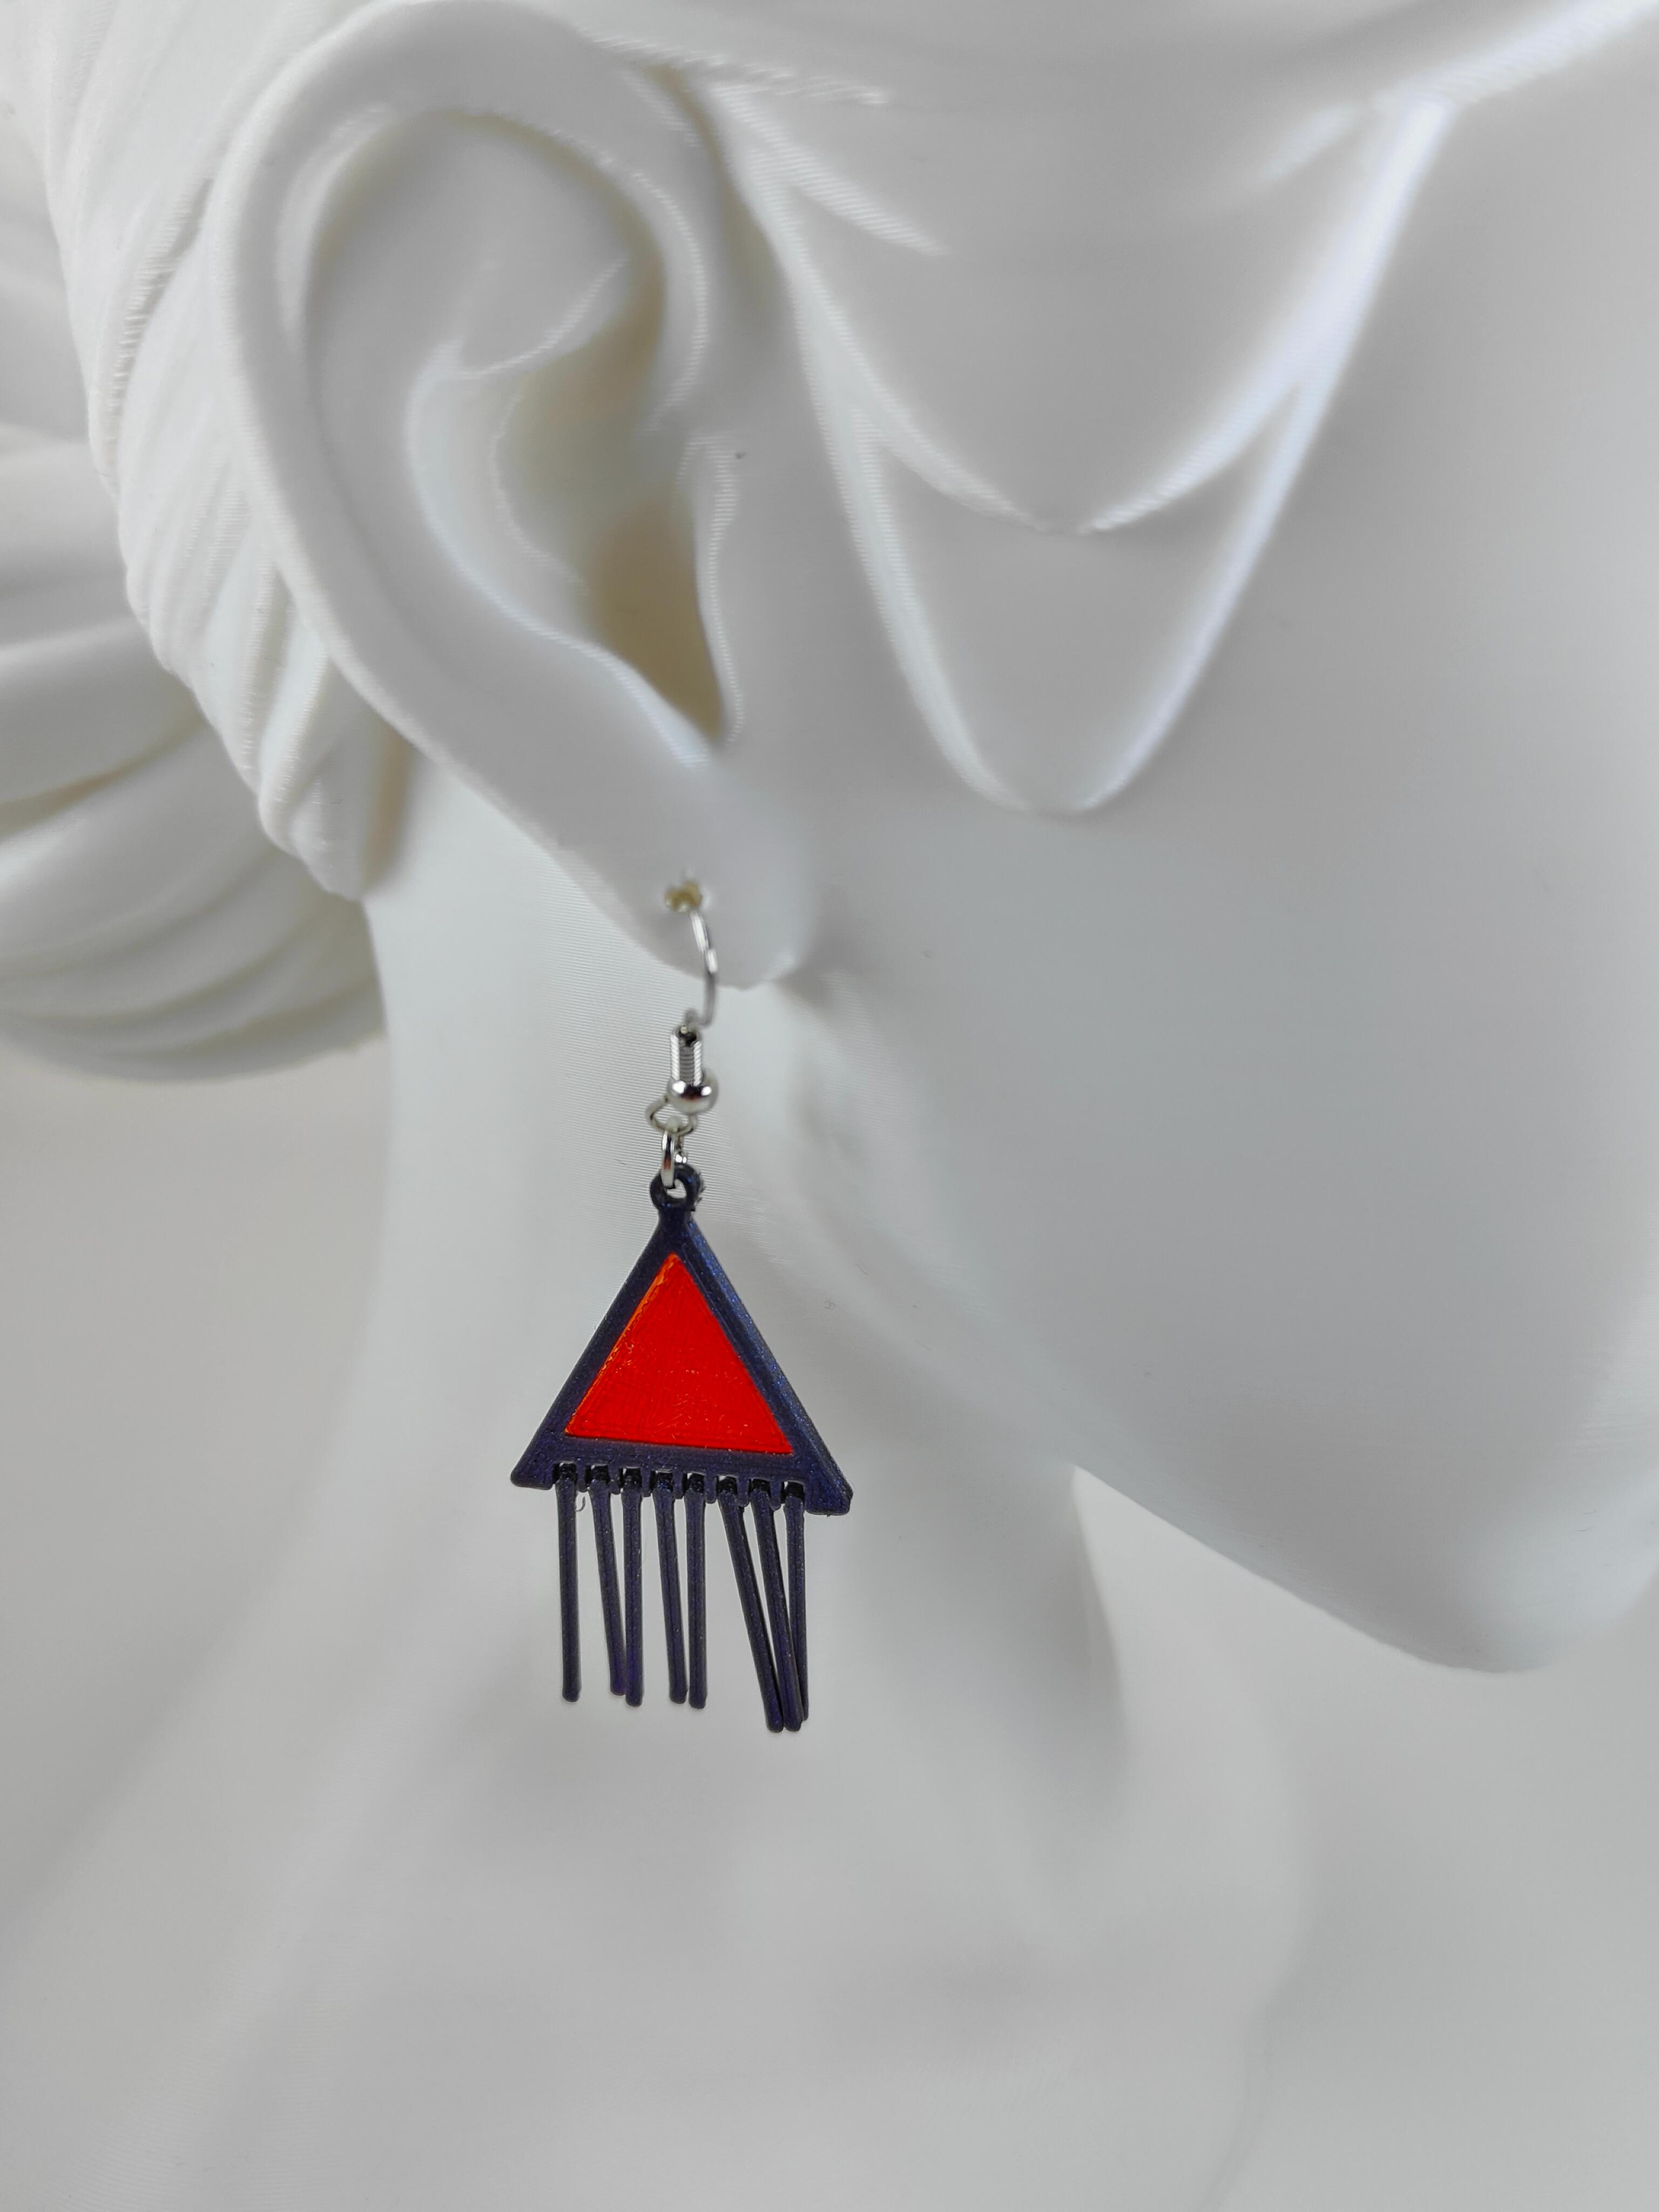 3D Printable Earrings - Triangle Trickle 